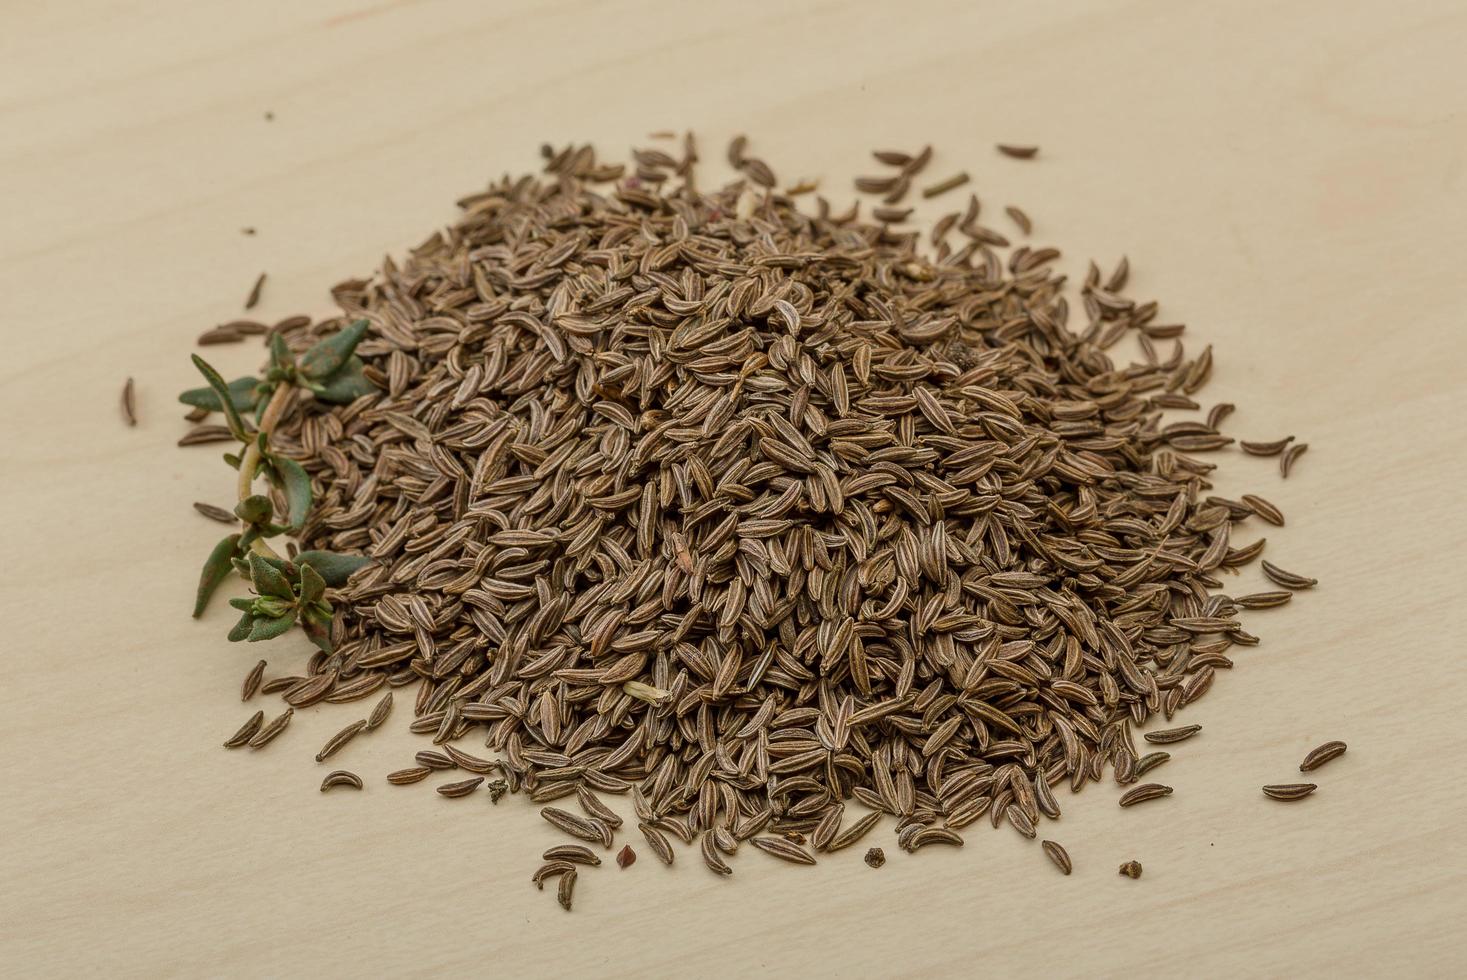 Dry caraway on wooden background photo